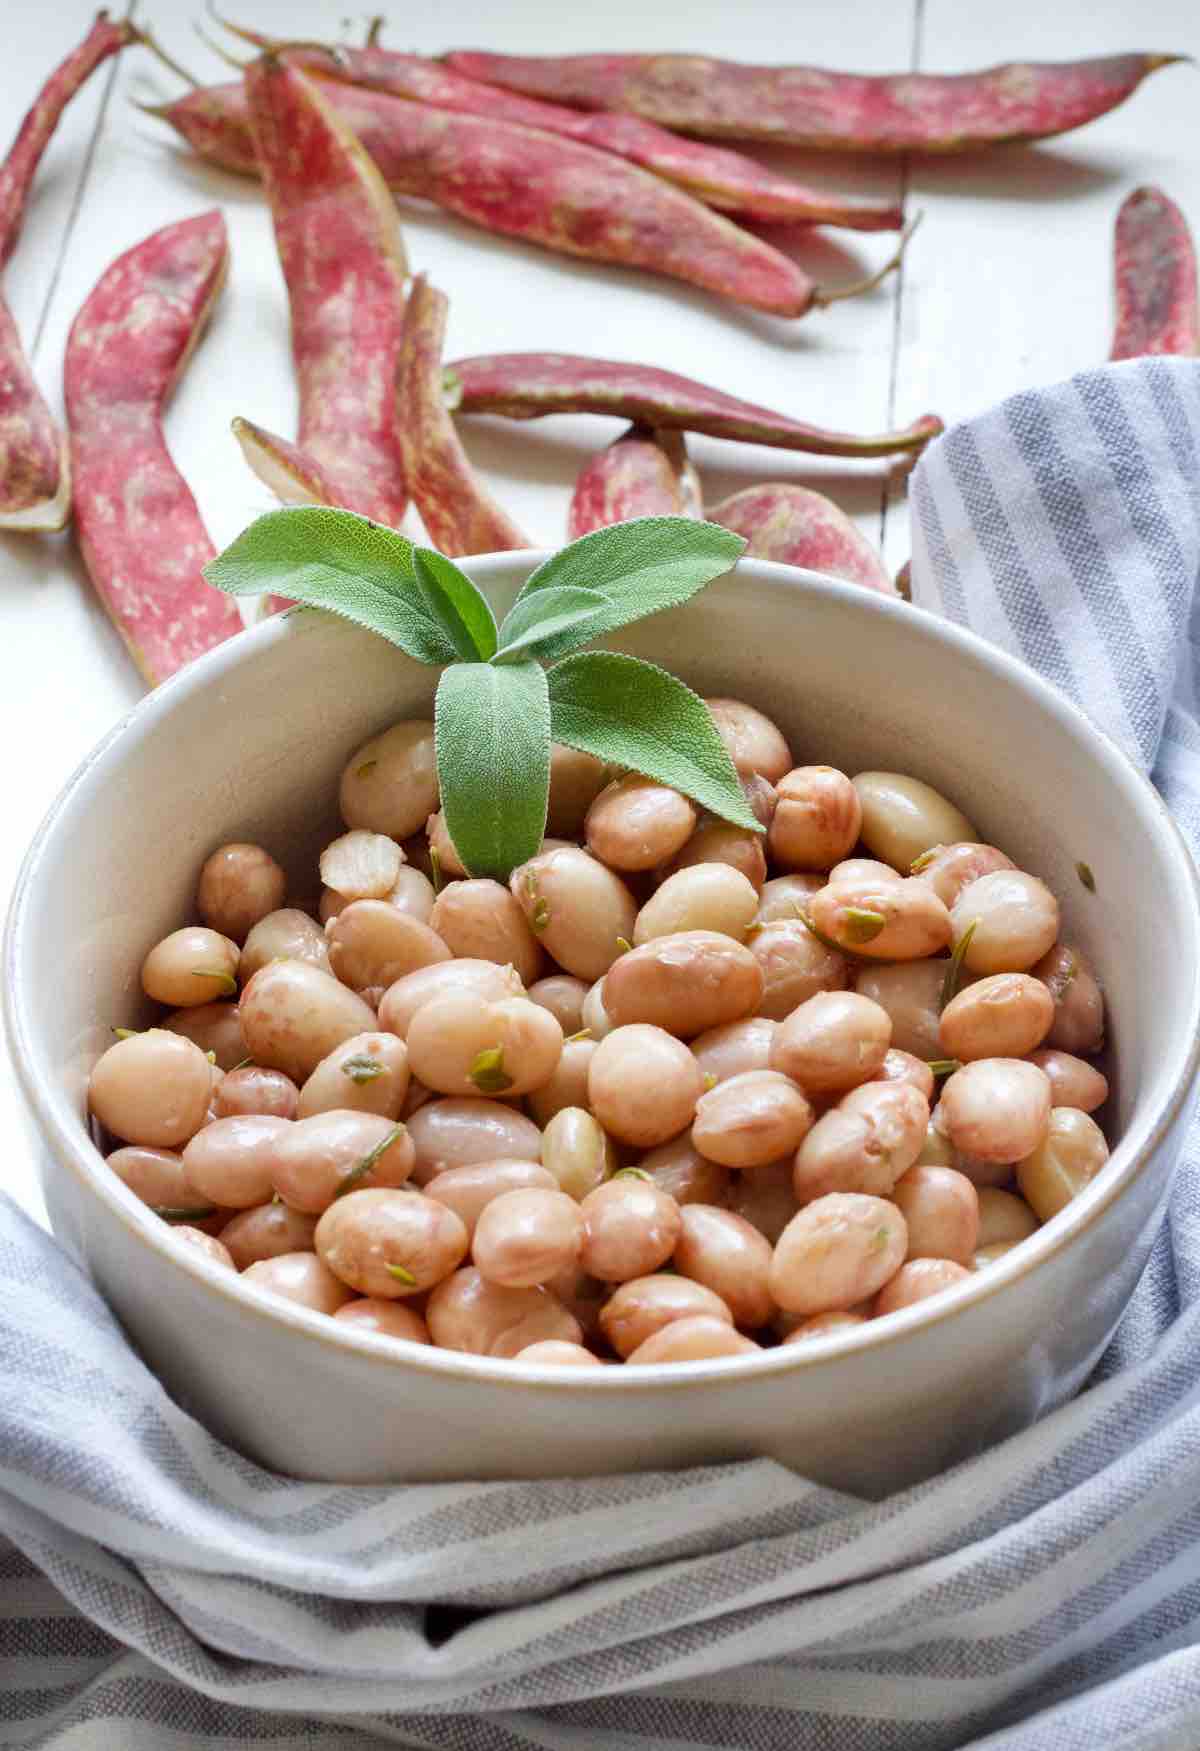 Borlotti beans in a bowl decorated with fresh sage, pods at the back.